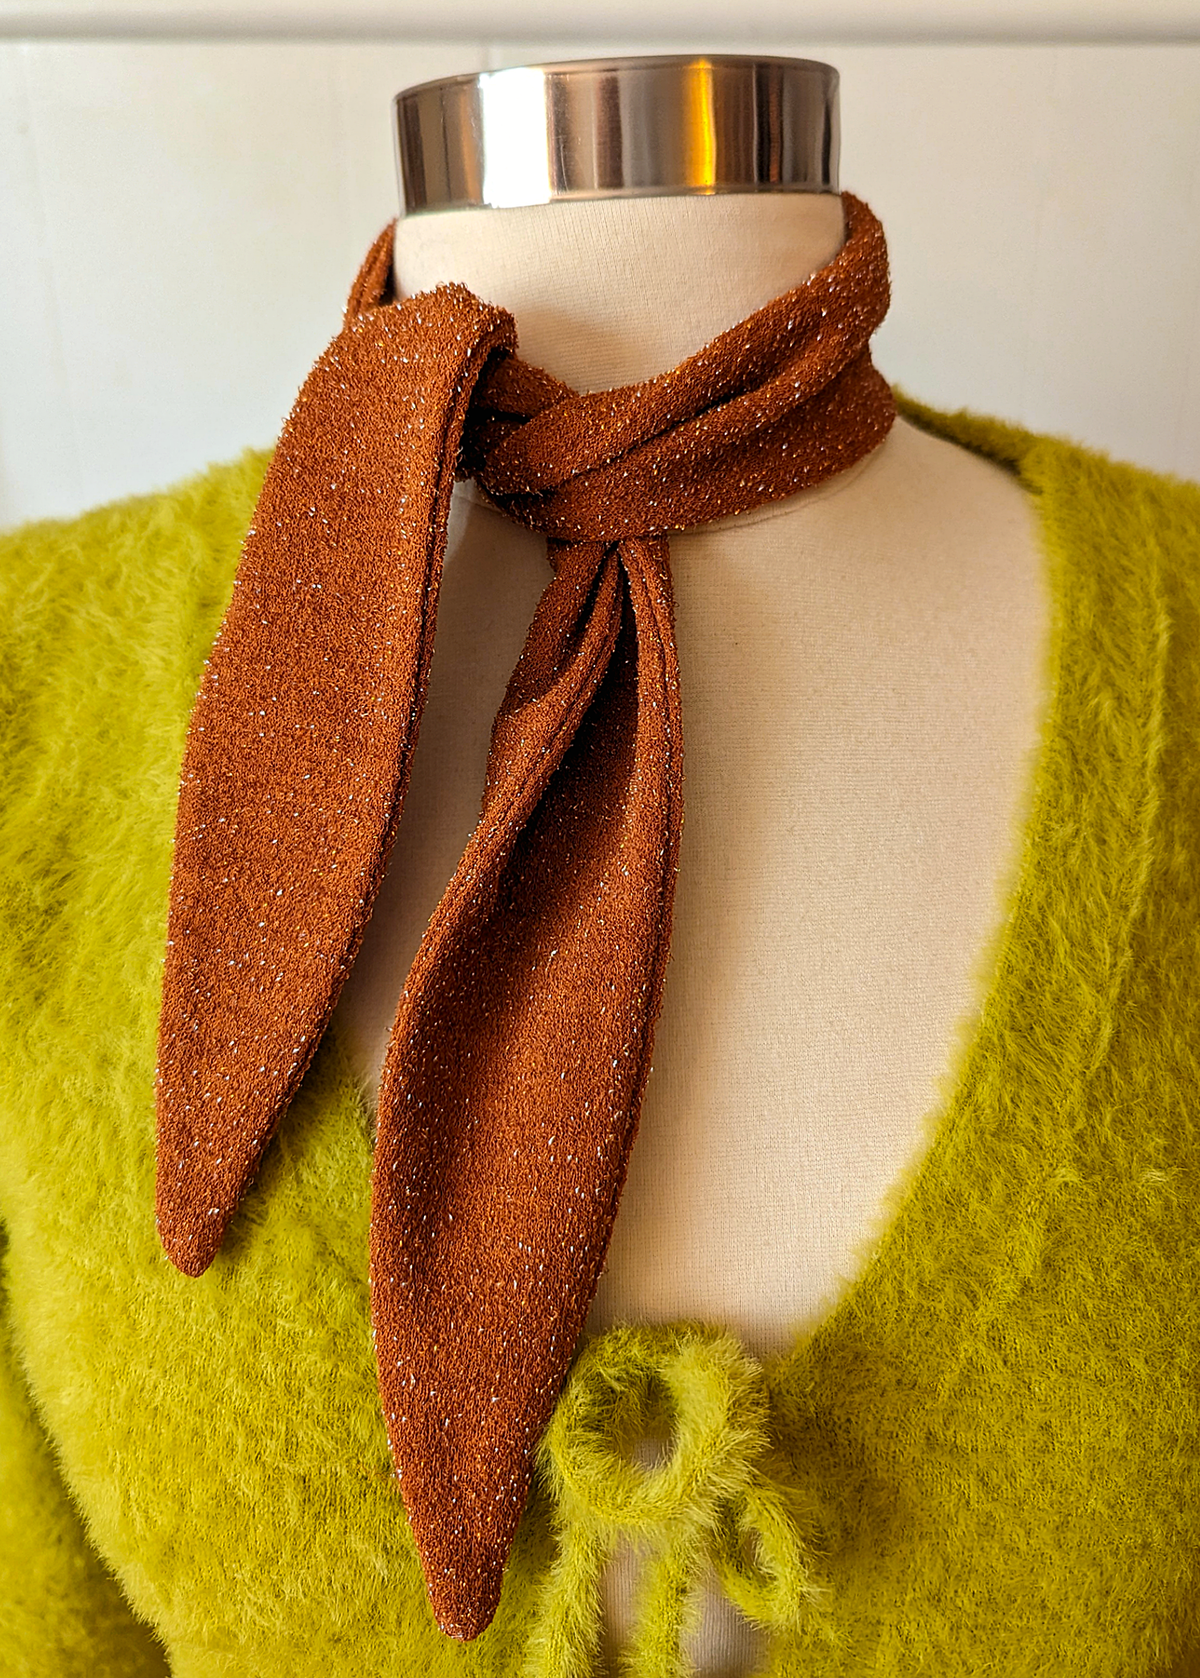 70s inspired disco glitter sparkle Brown Sugar Rust Orange scarf neck tie by I'm with the Band, made in california